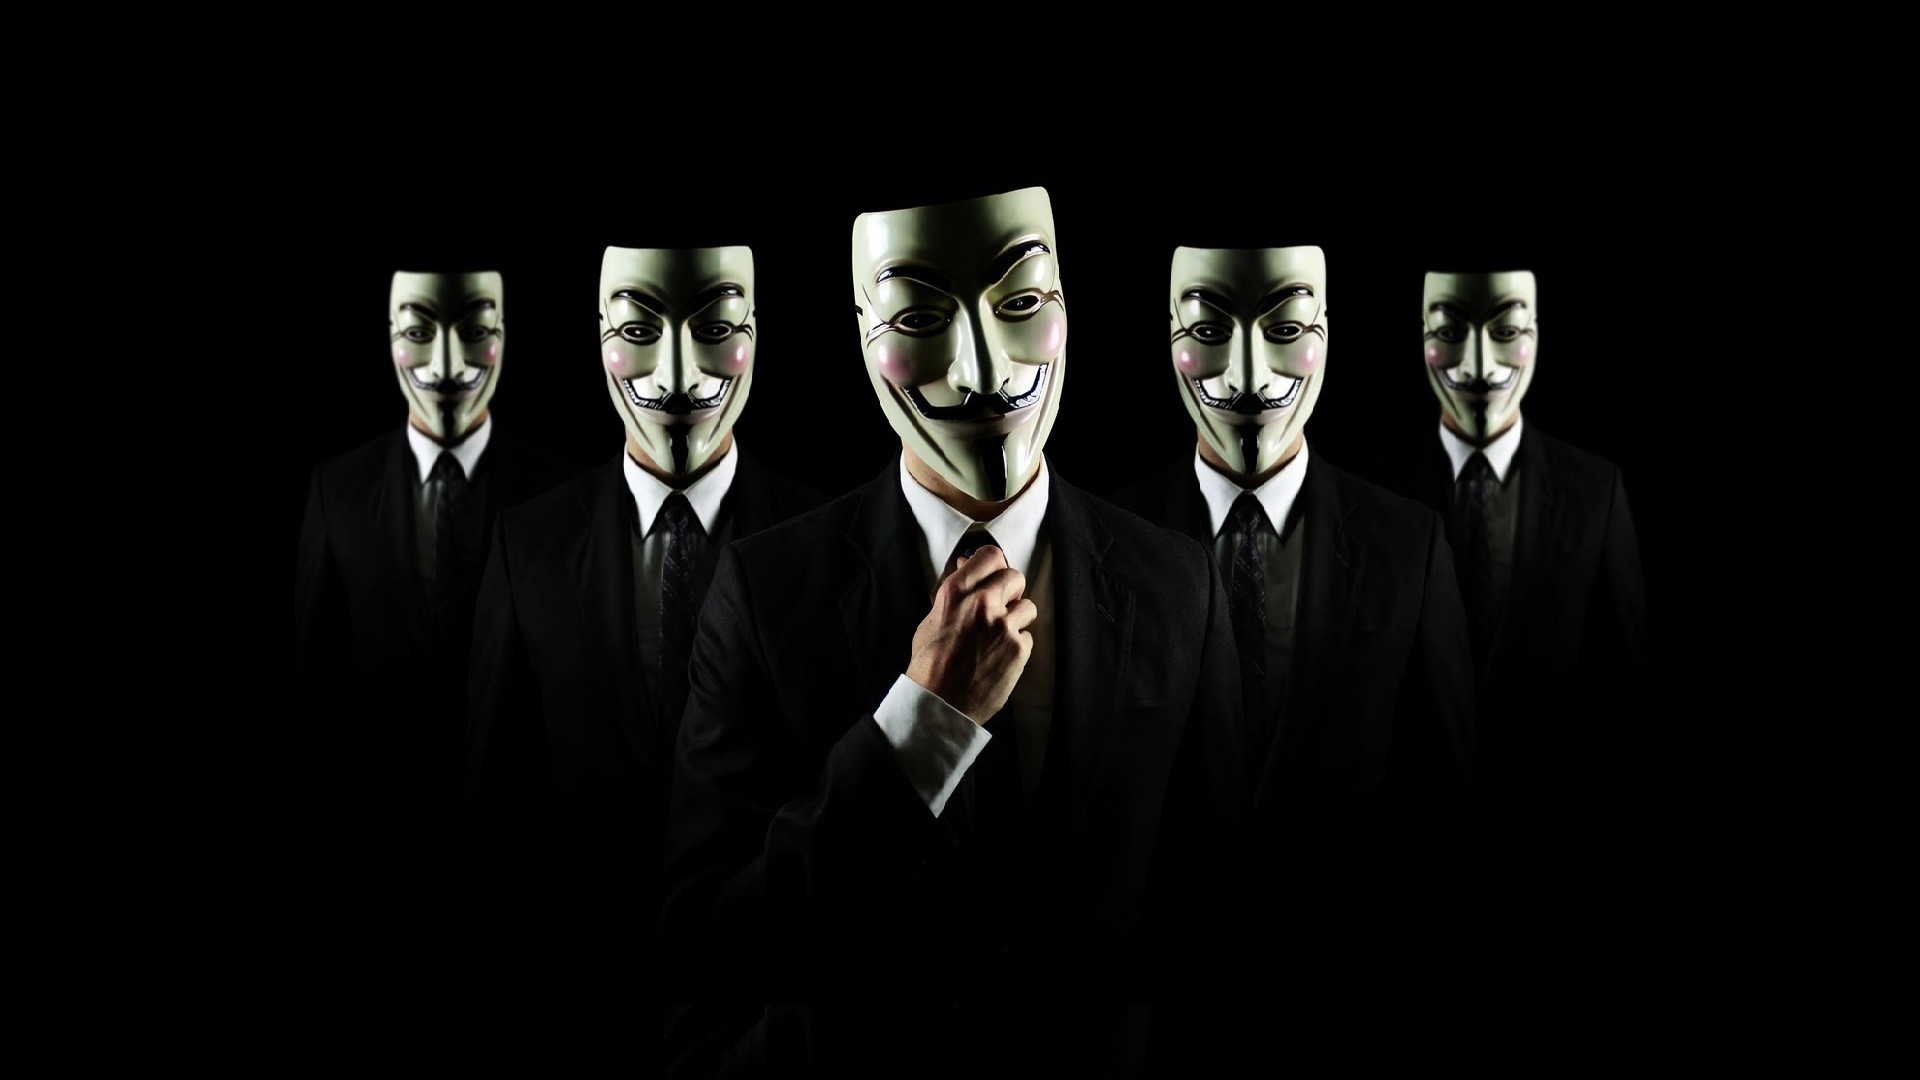 HD Anonymous Suit Tie Guy Fawkes Hackers V For Vendetta Wallpaper